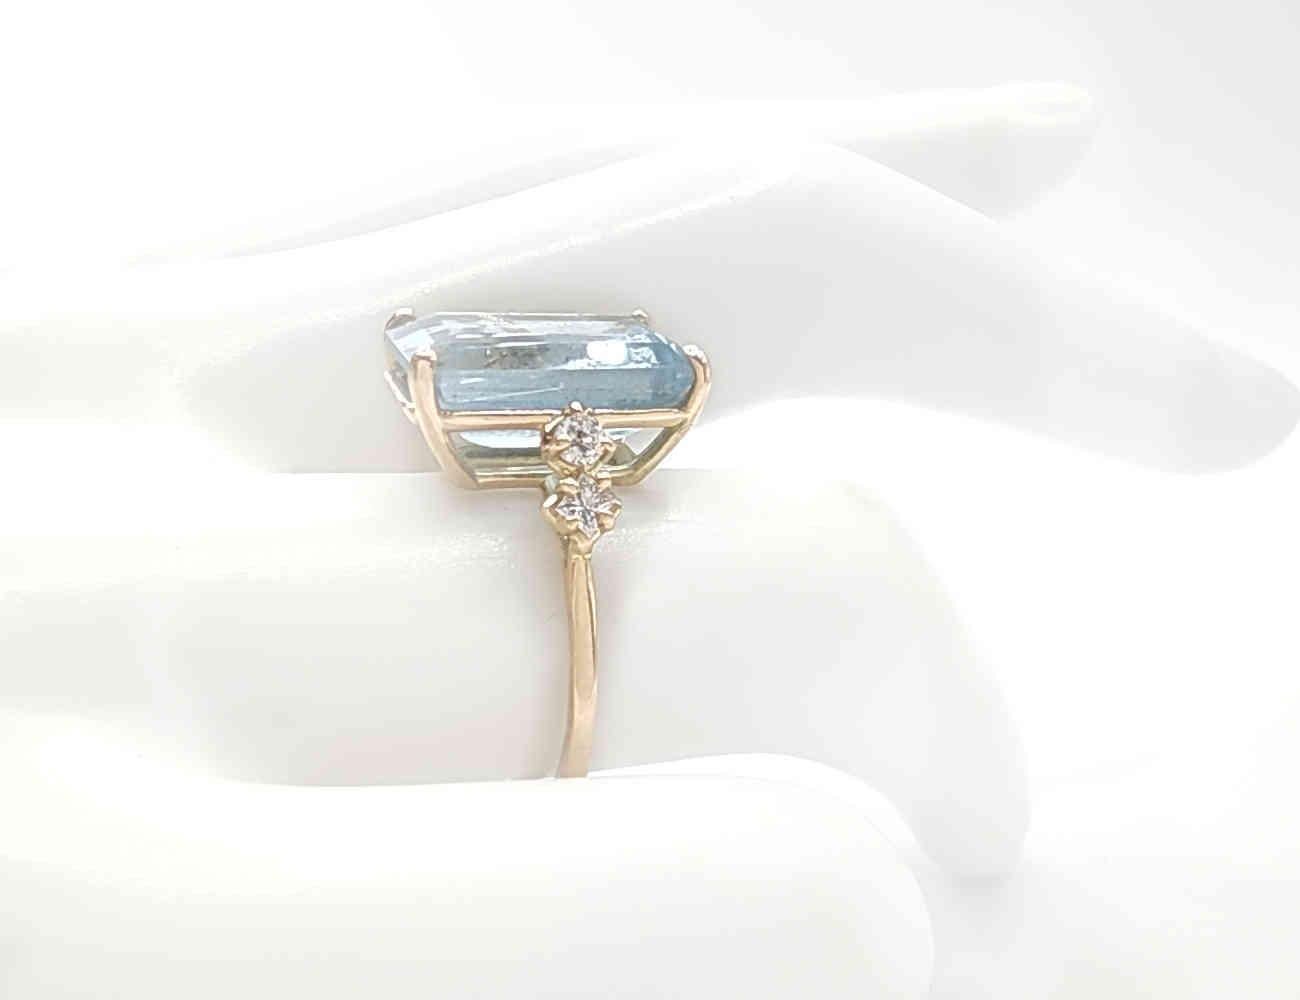 Technical Details:
SIZE:
To look at the photos with the scale ruler
American Size:6.5
European Size:13.5

Gemstone:

- Natural untreated rectangular emerald-cut Aquamarine weighing 5.75 carats.
- Dimensions: 14 x 8.5 x 6.1mm.
- 2 natural round